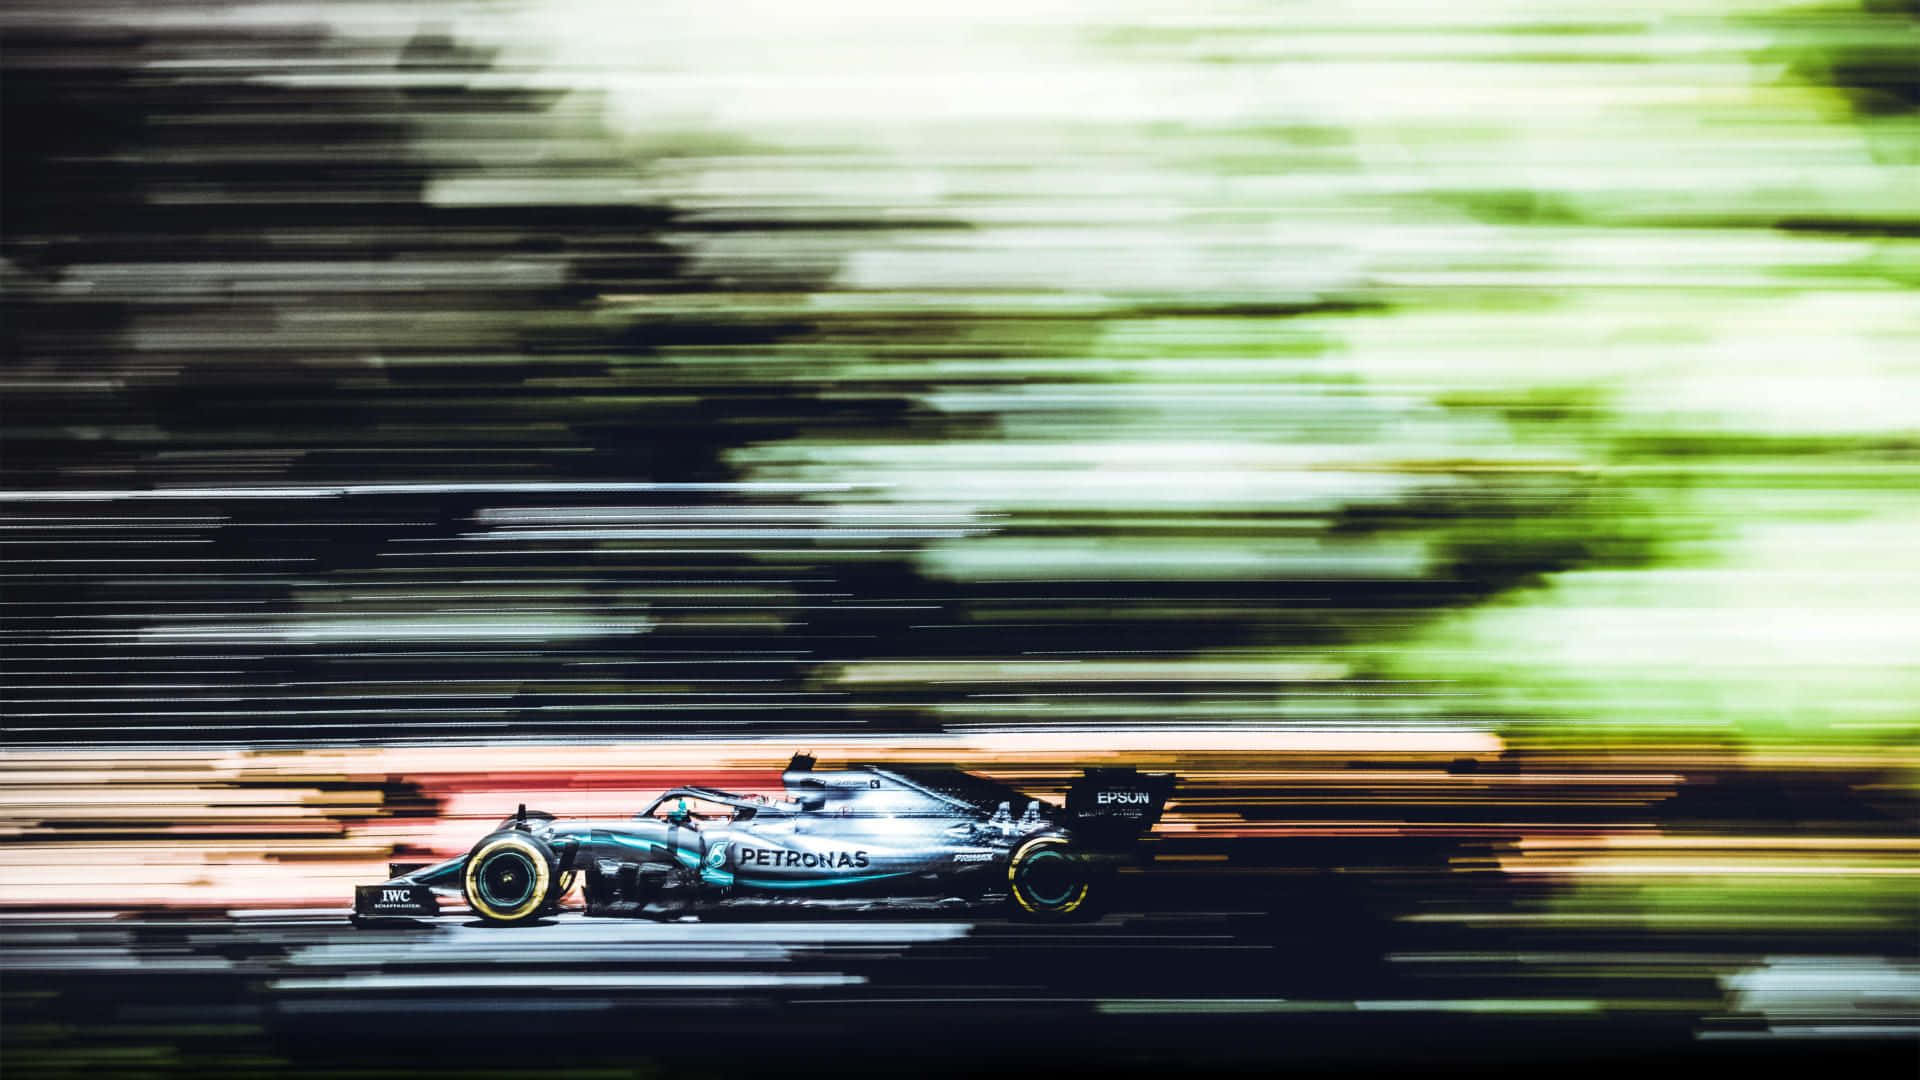 A Blurry Image Of A Racing Car